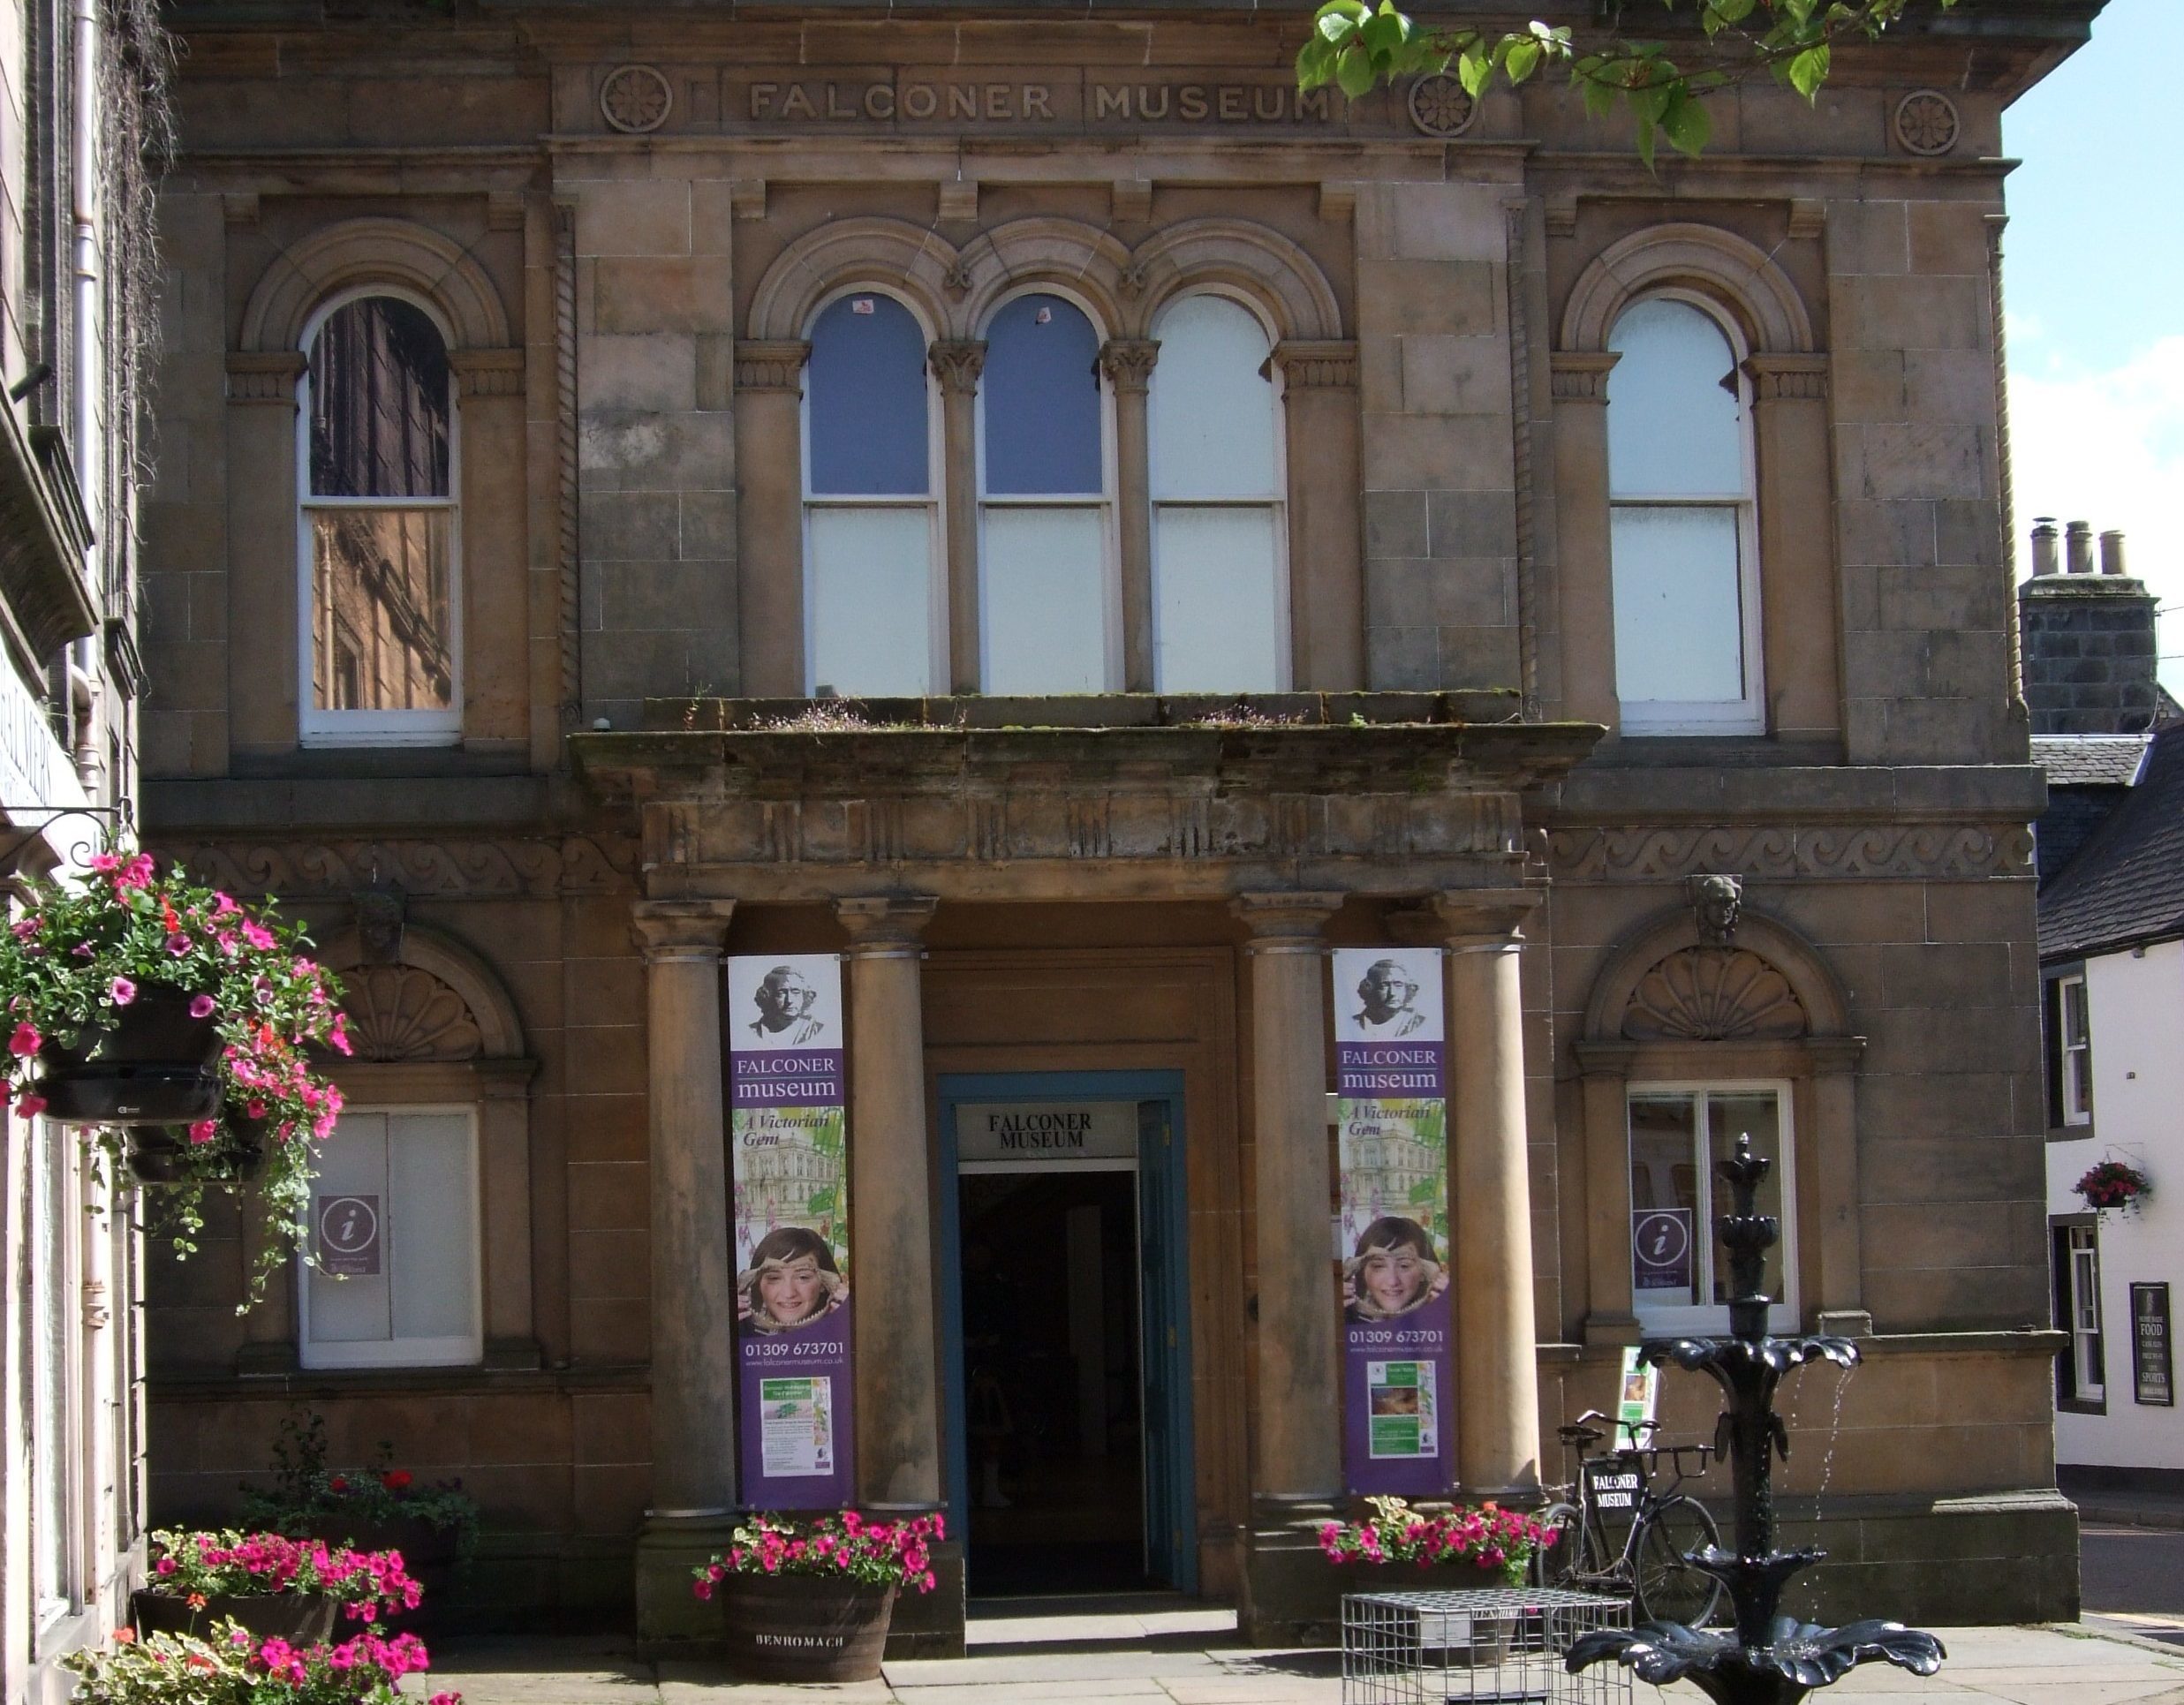 About 6,000 people attend the Falconer Museum in Forres every year.